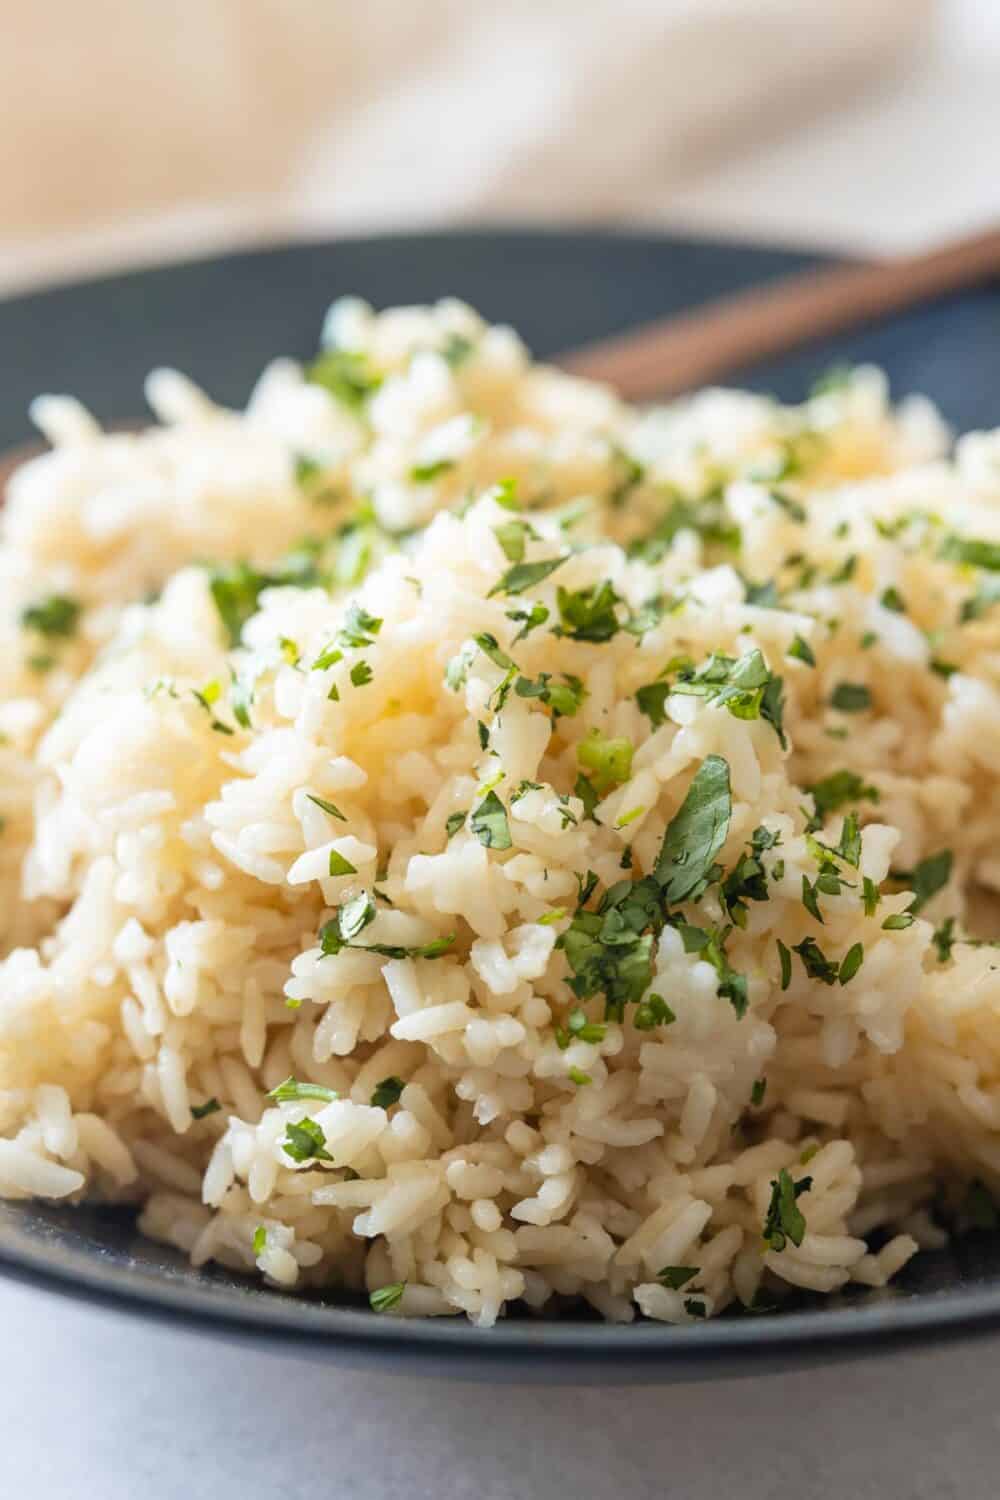 Closup image of texture of coconut rice.